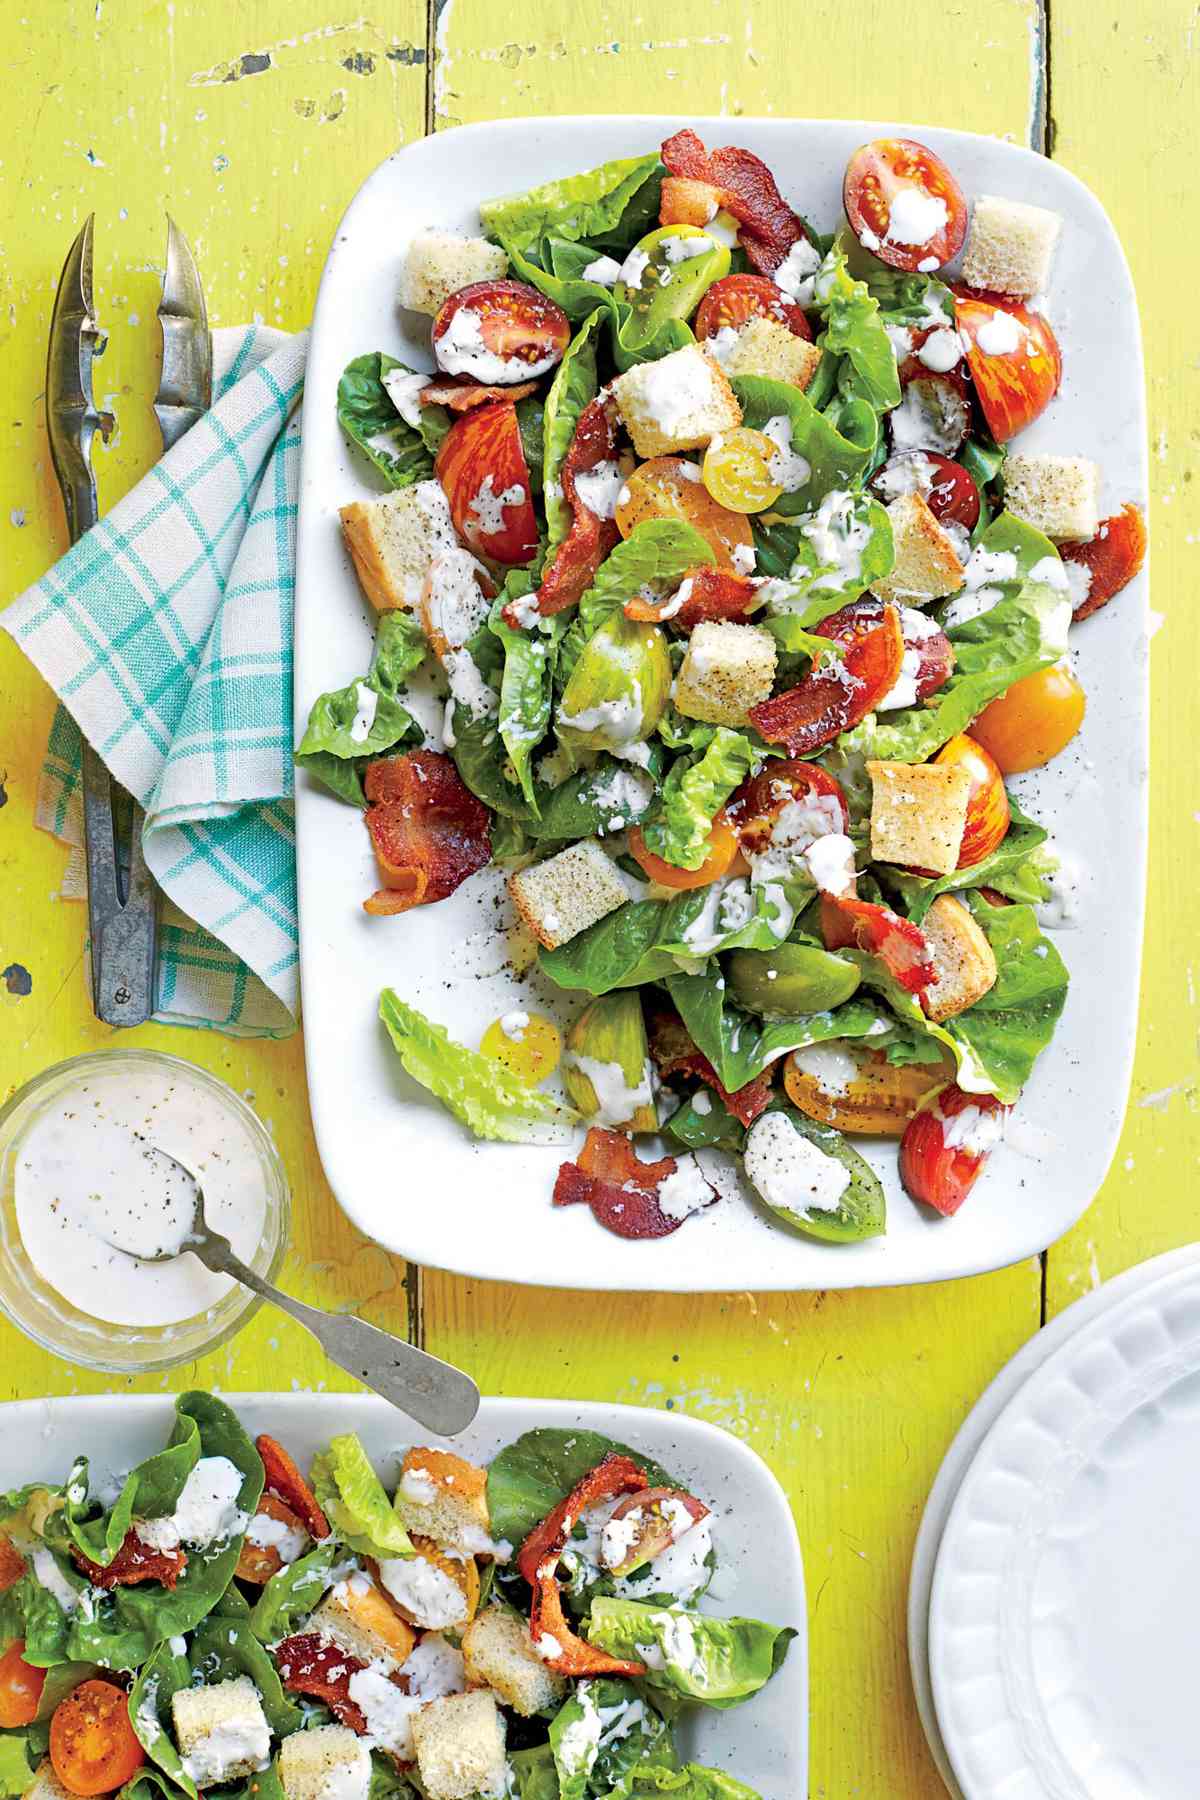 Quick & Delicious Summer Salad Recipes | Southern Living